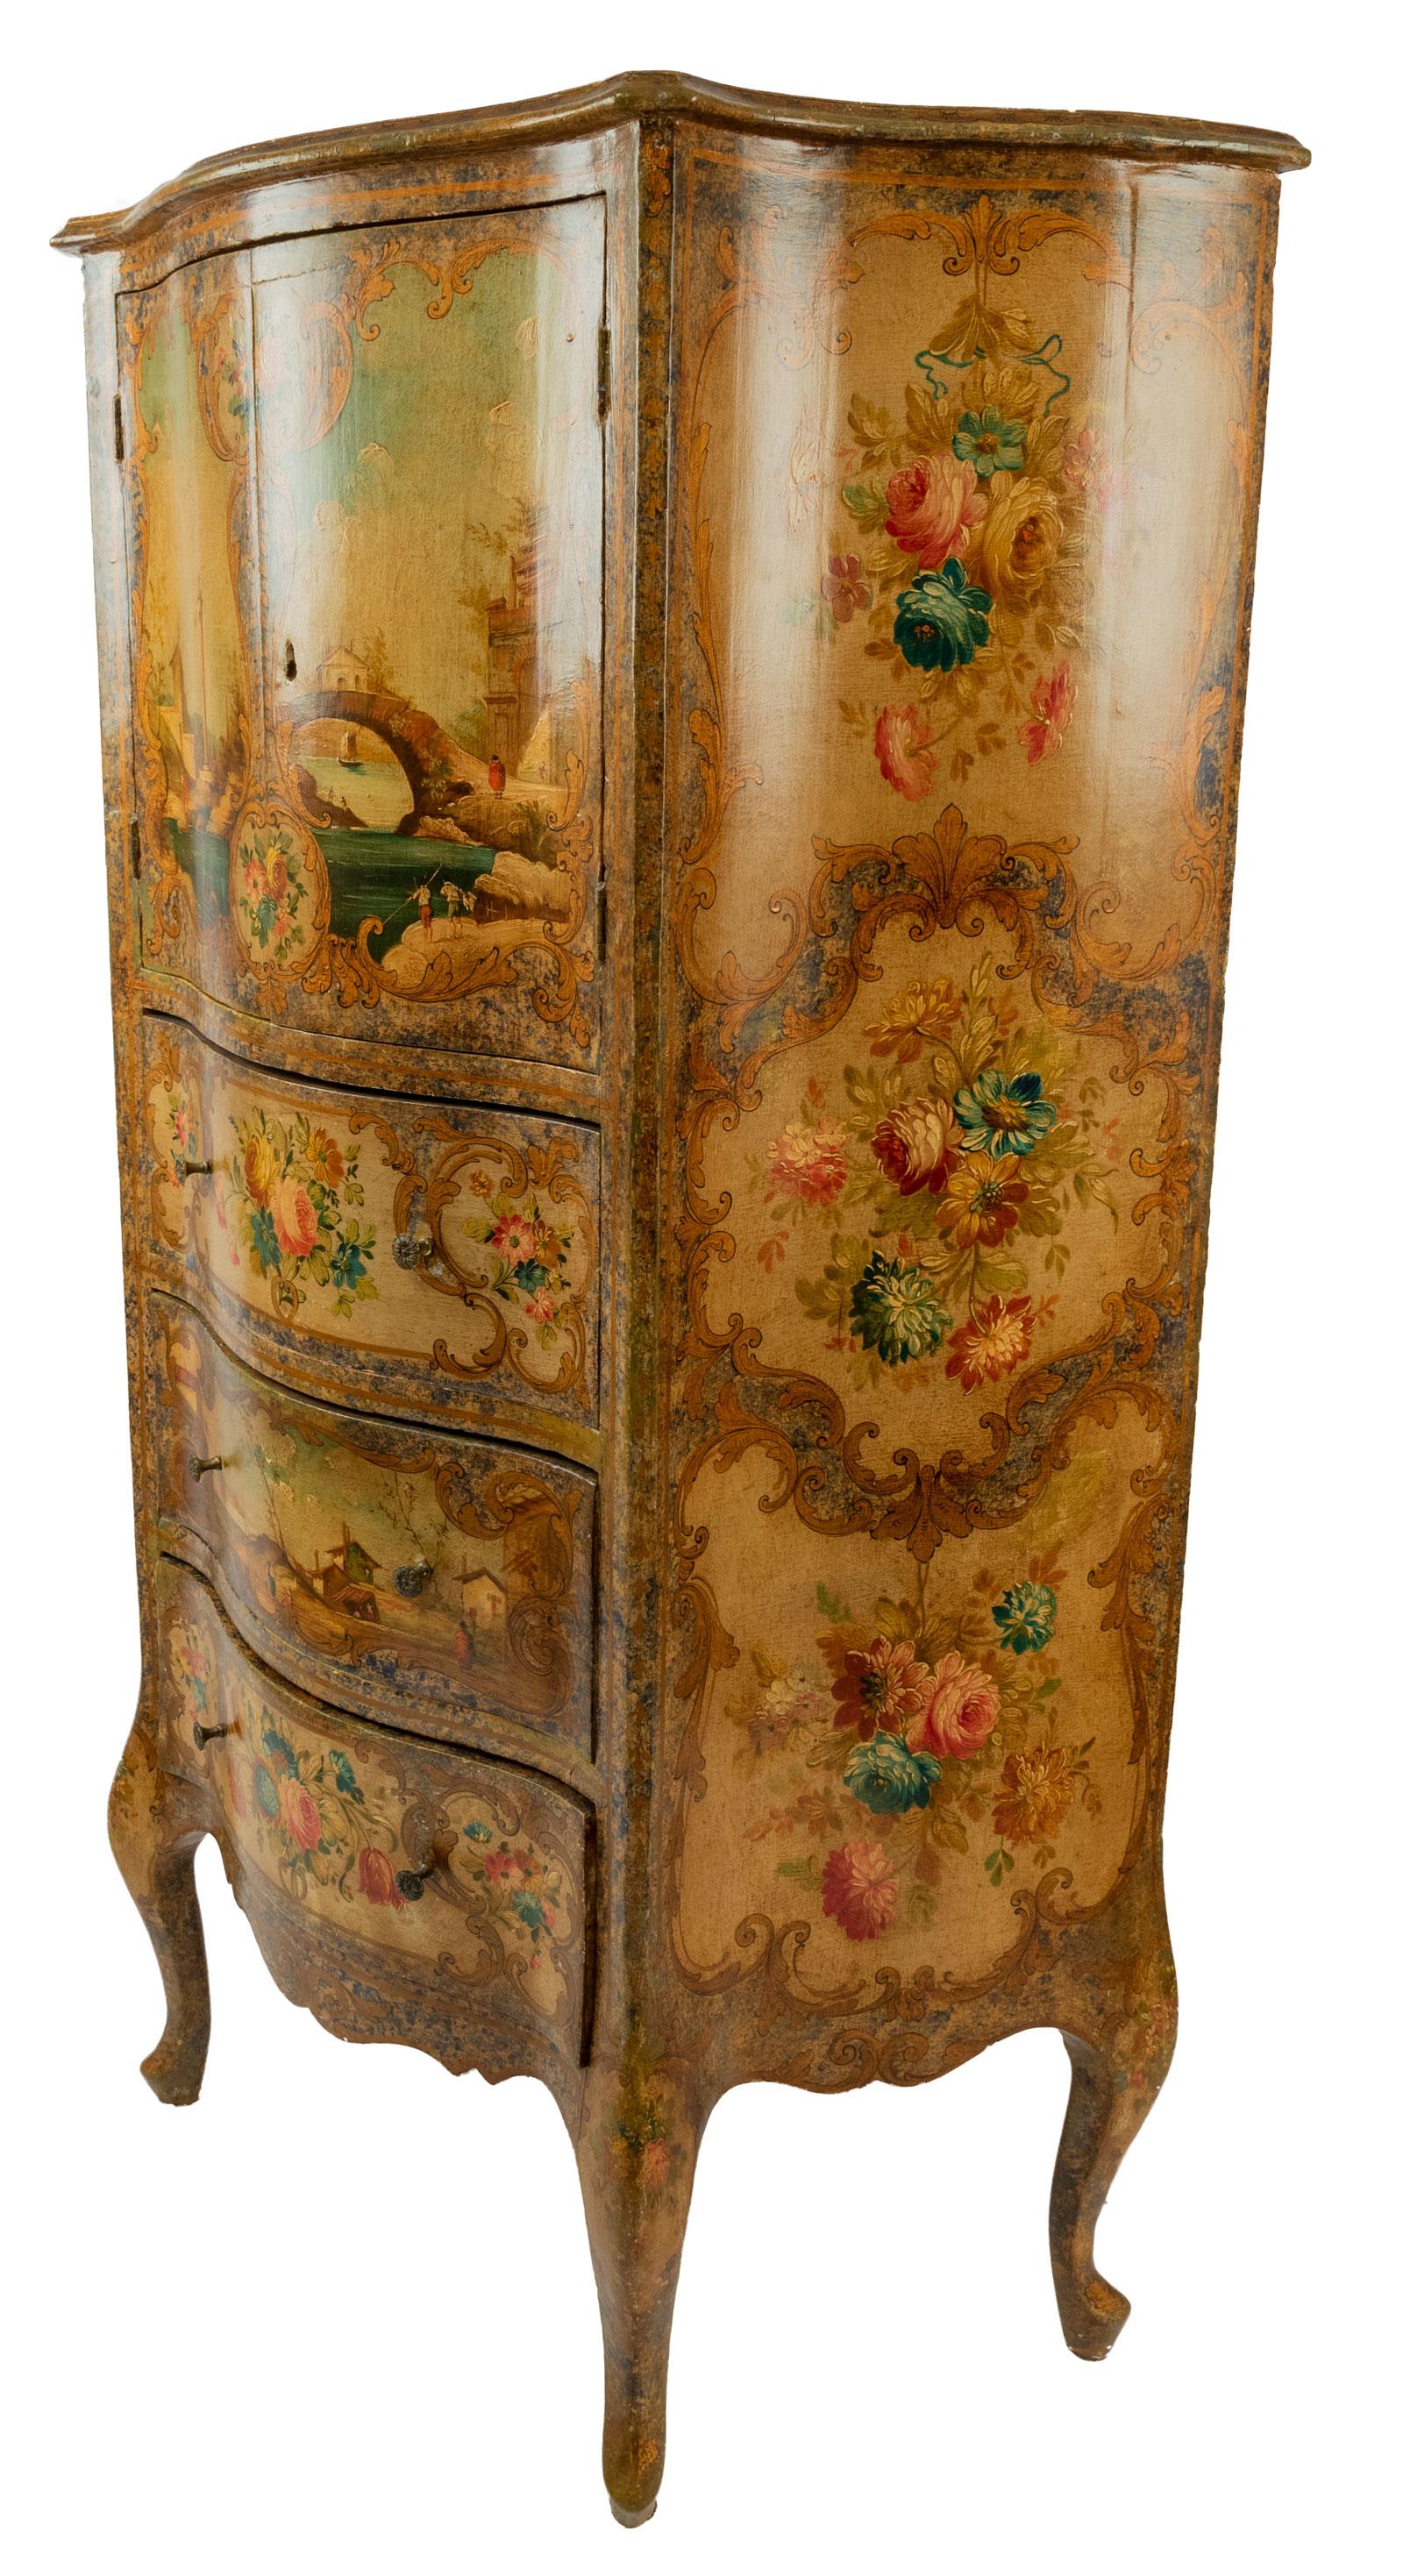 A Venetian dresser with three drawers surmounted by a large cabinet painted with scenes of floral sprays and ancient ruins.